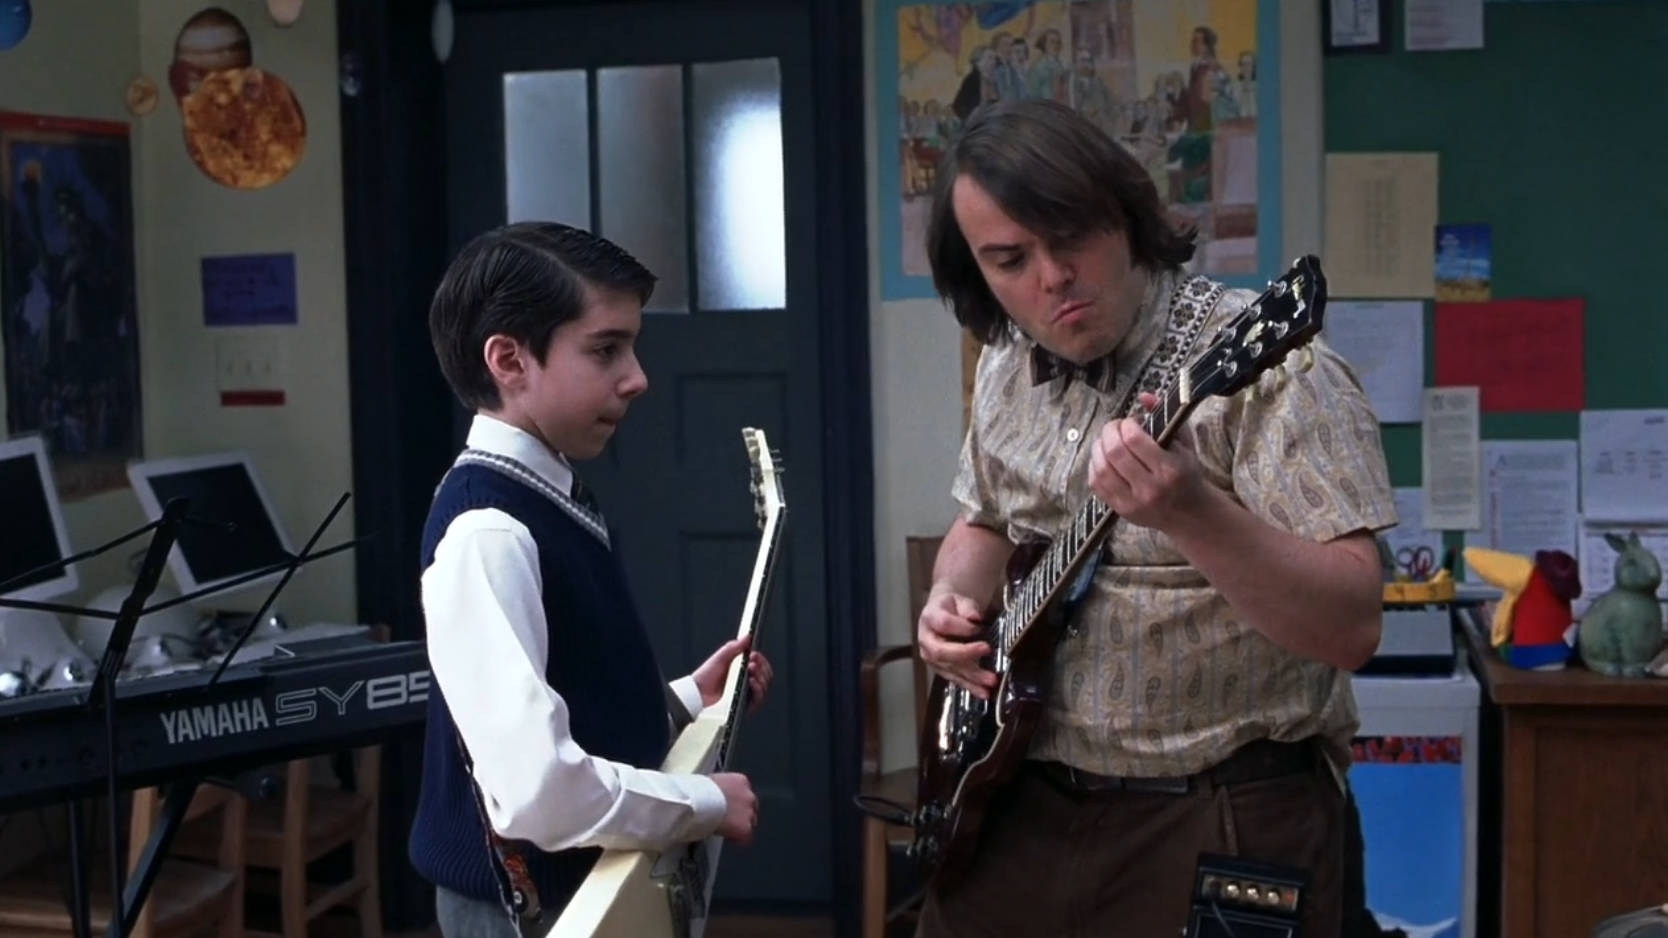 scene from the movie where the music teacher is teaching guitar to a student